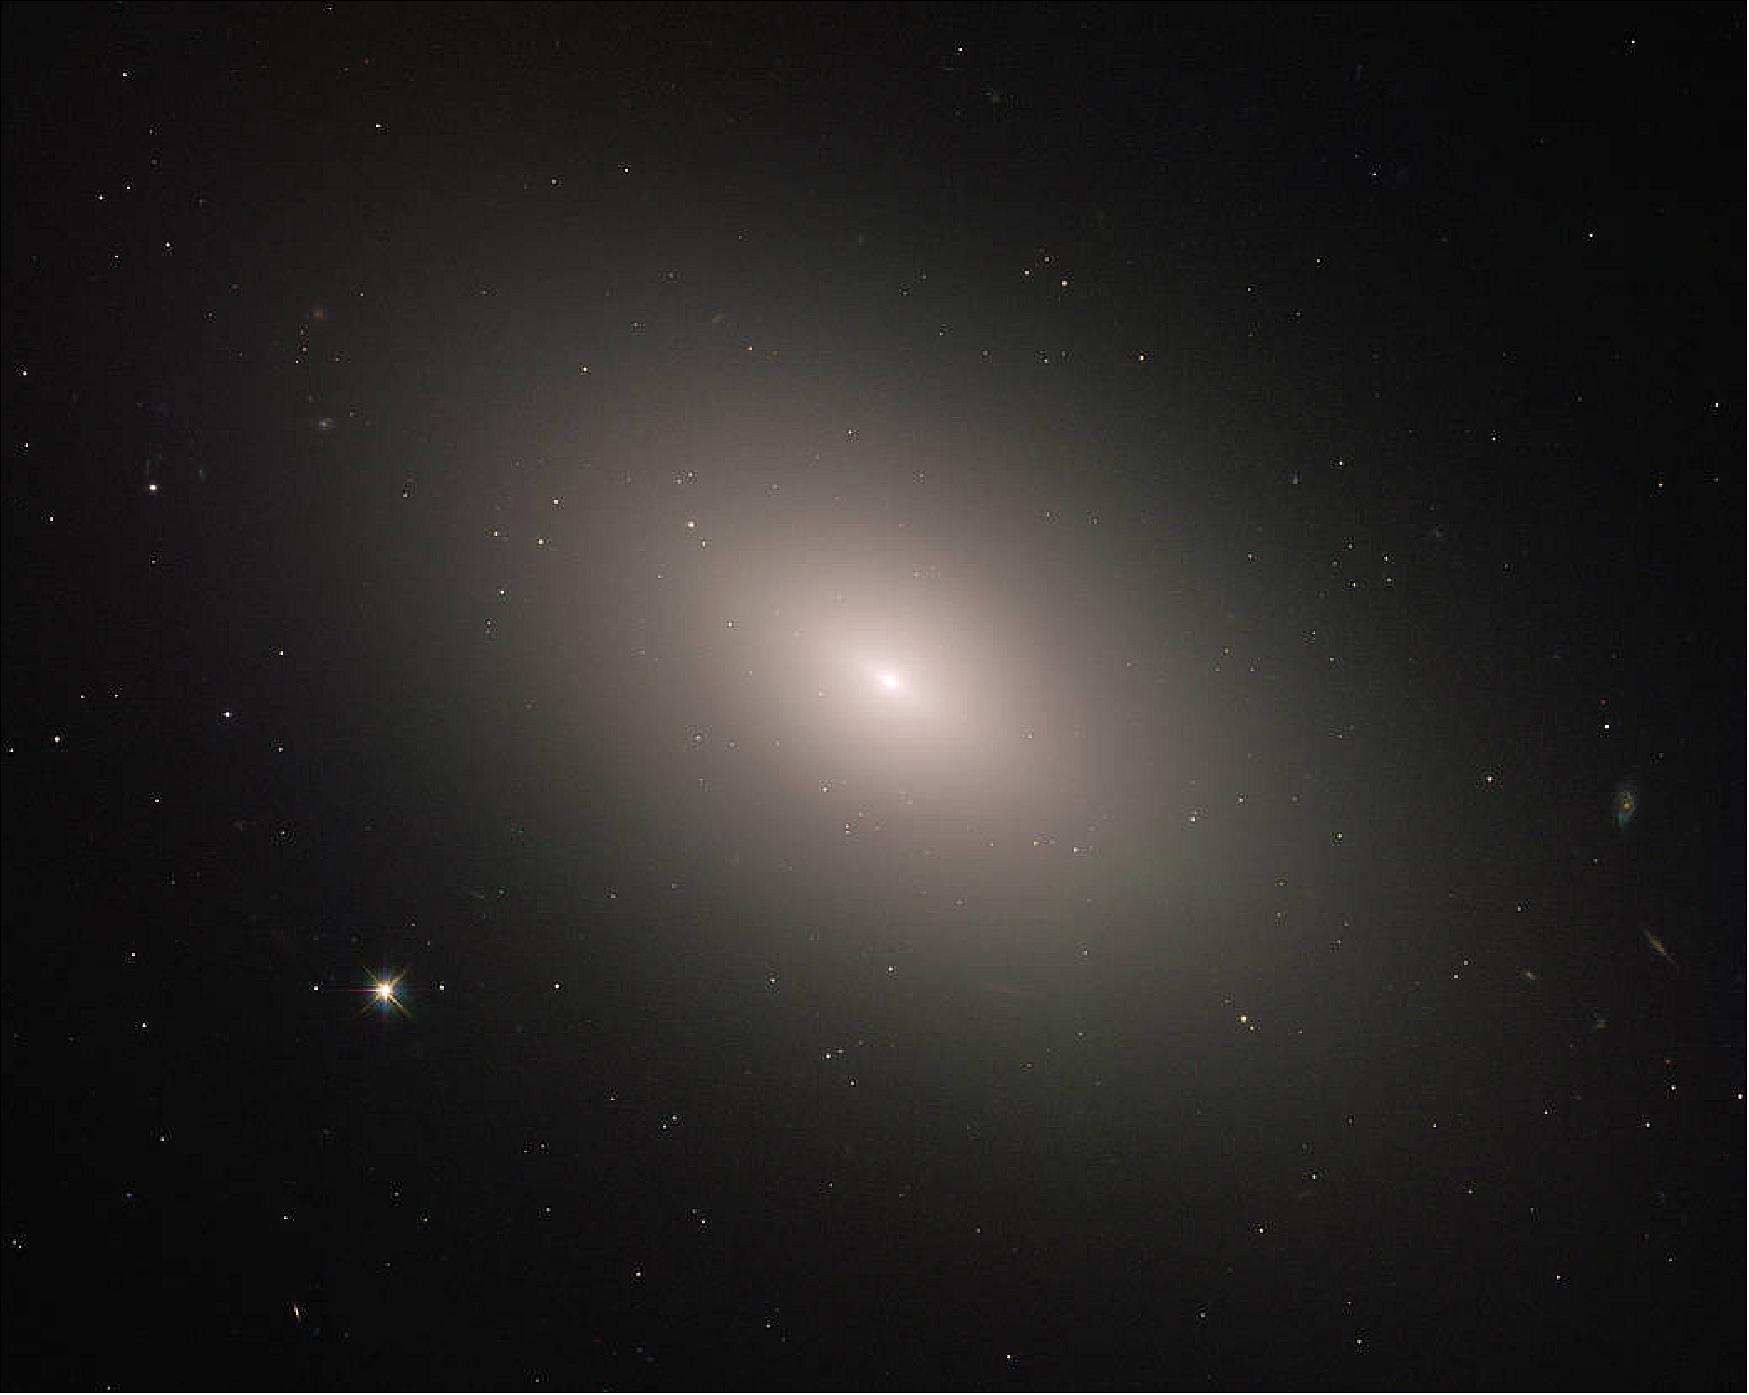 Figure 47: Modern observations show that Messier 59 is an elliptical galaxy, one of the three main kinds of galaxies along with spirals and irregulars. Ellipticals tend to be the most evolved of the trio, full of old, red stars and exhibiting little or no new star formation. Messier 59, however, bucks this trend somewhat; the galaxy does show signs of star formation, with some newborn stars residing within a disk near the core (image credit: ESA/Hubble & NASA, P. Cote)